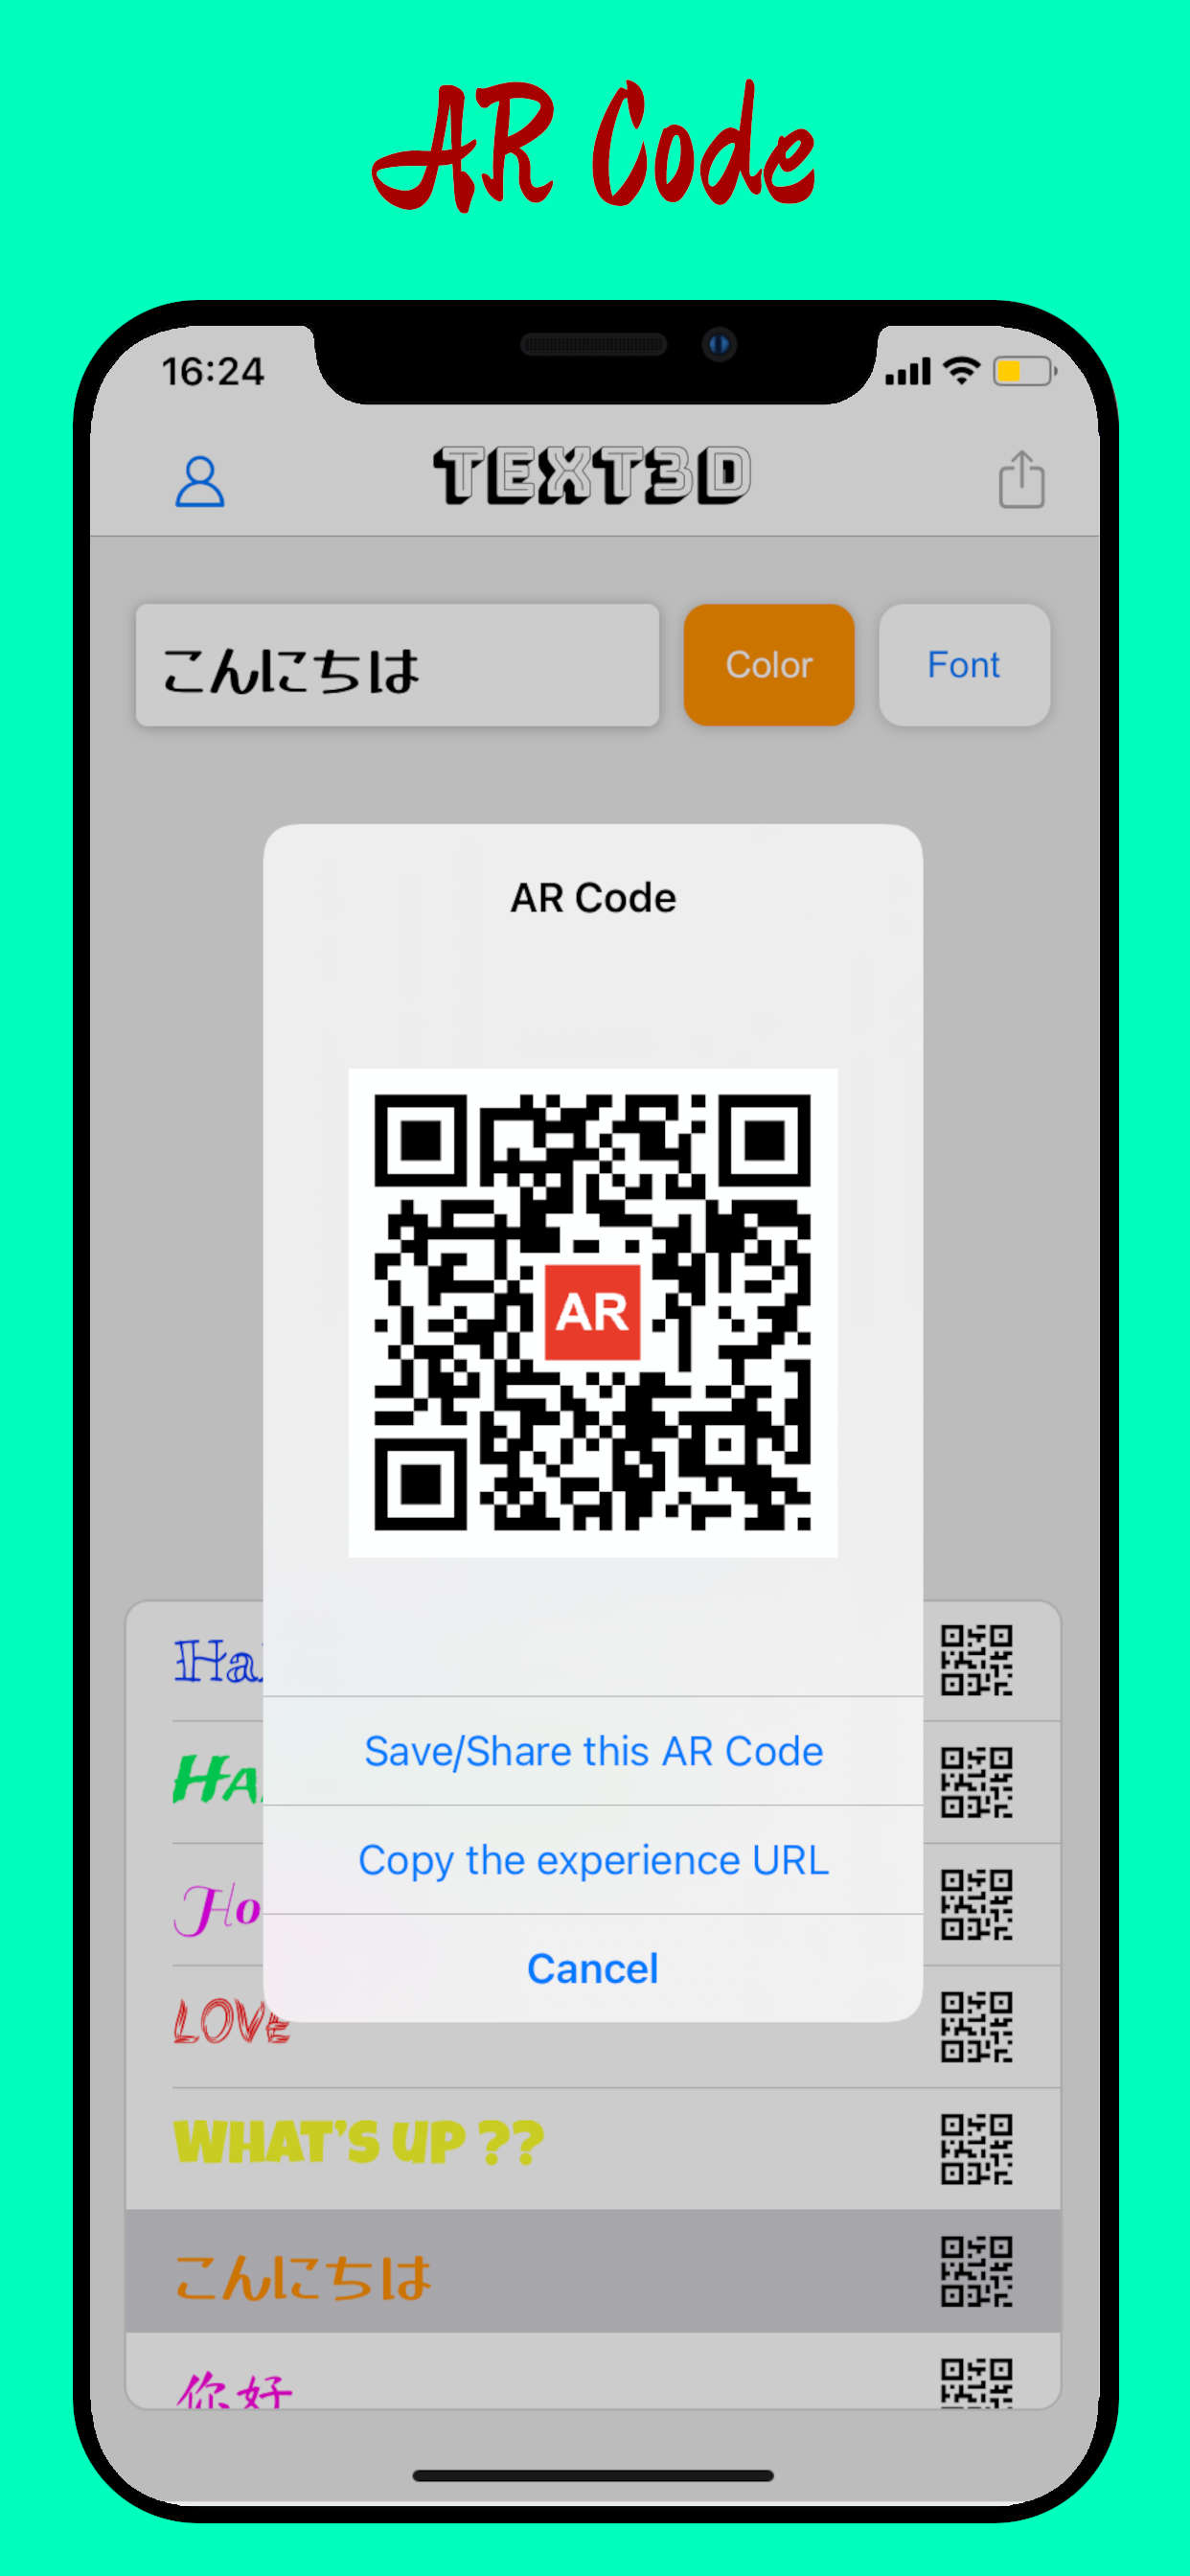 Share your creation with an AR Code